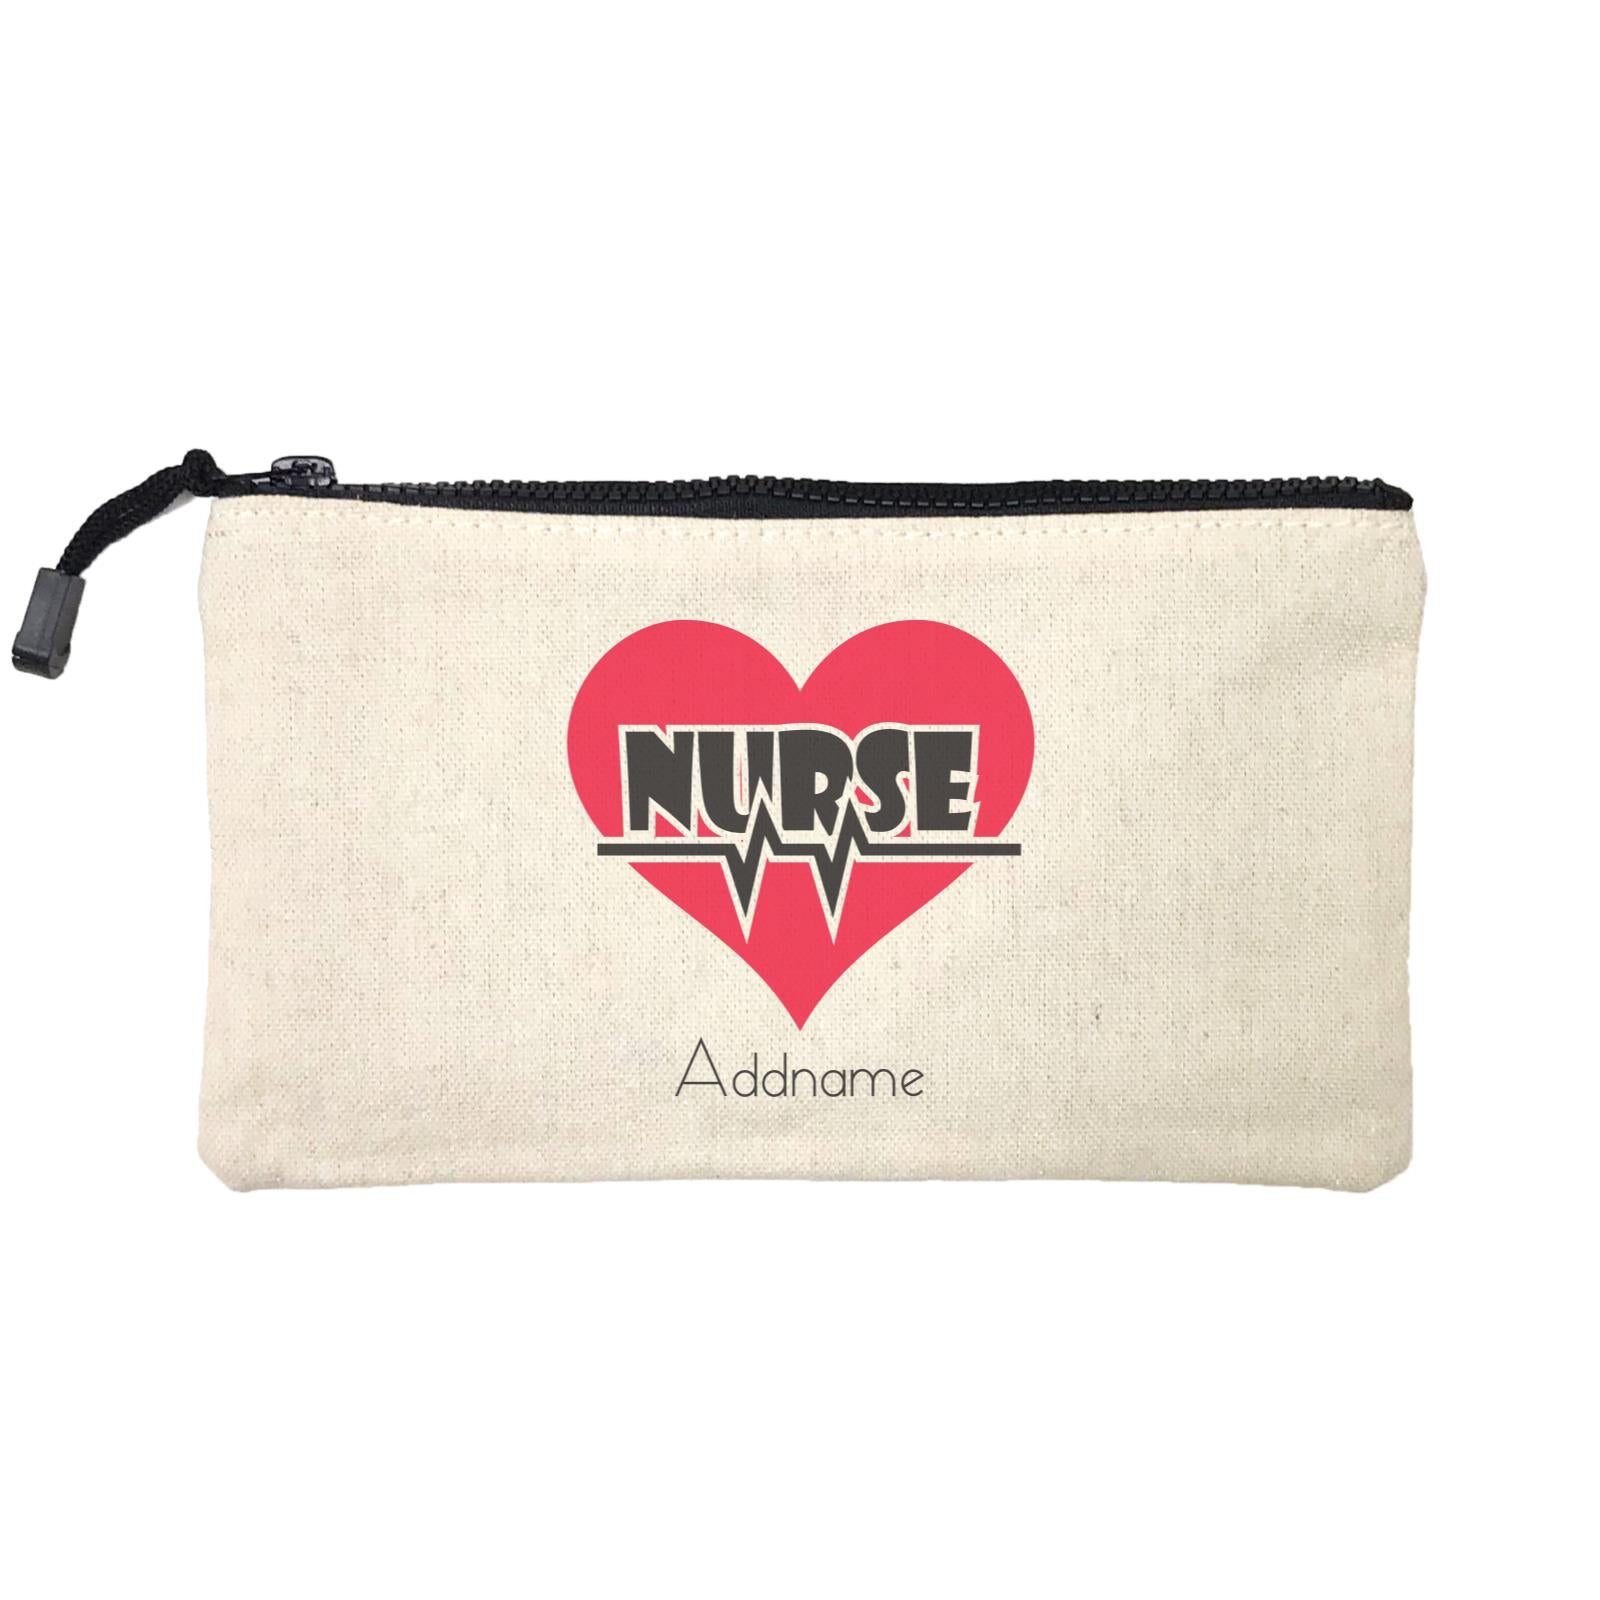 Nurse with Pink Heart Mini Accessories Stationery Pouch